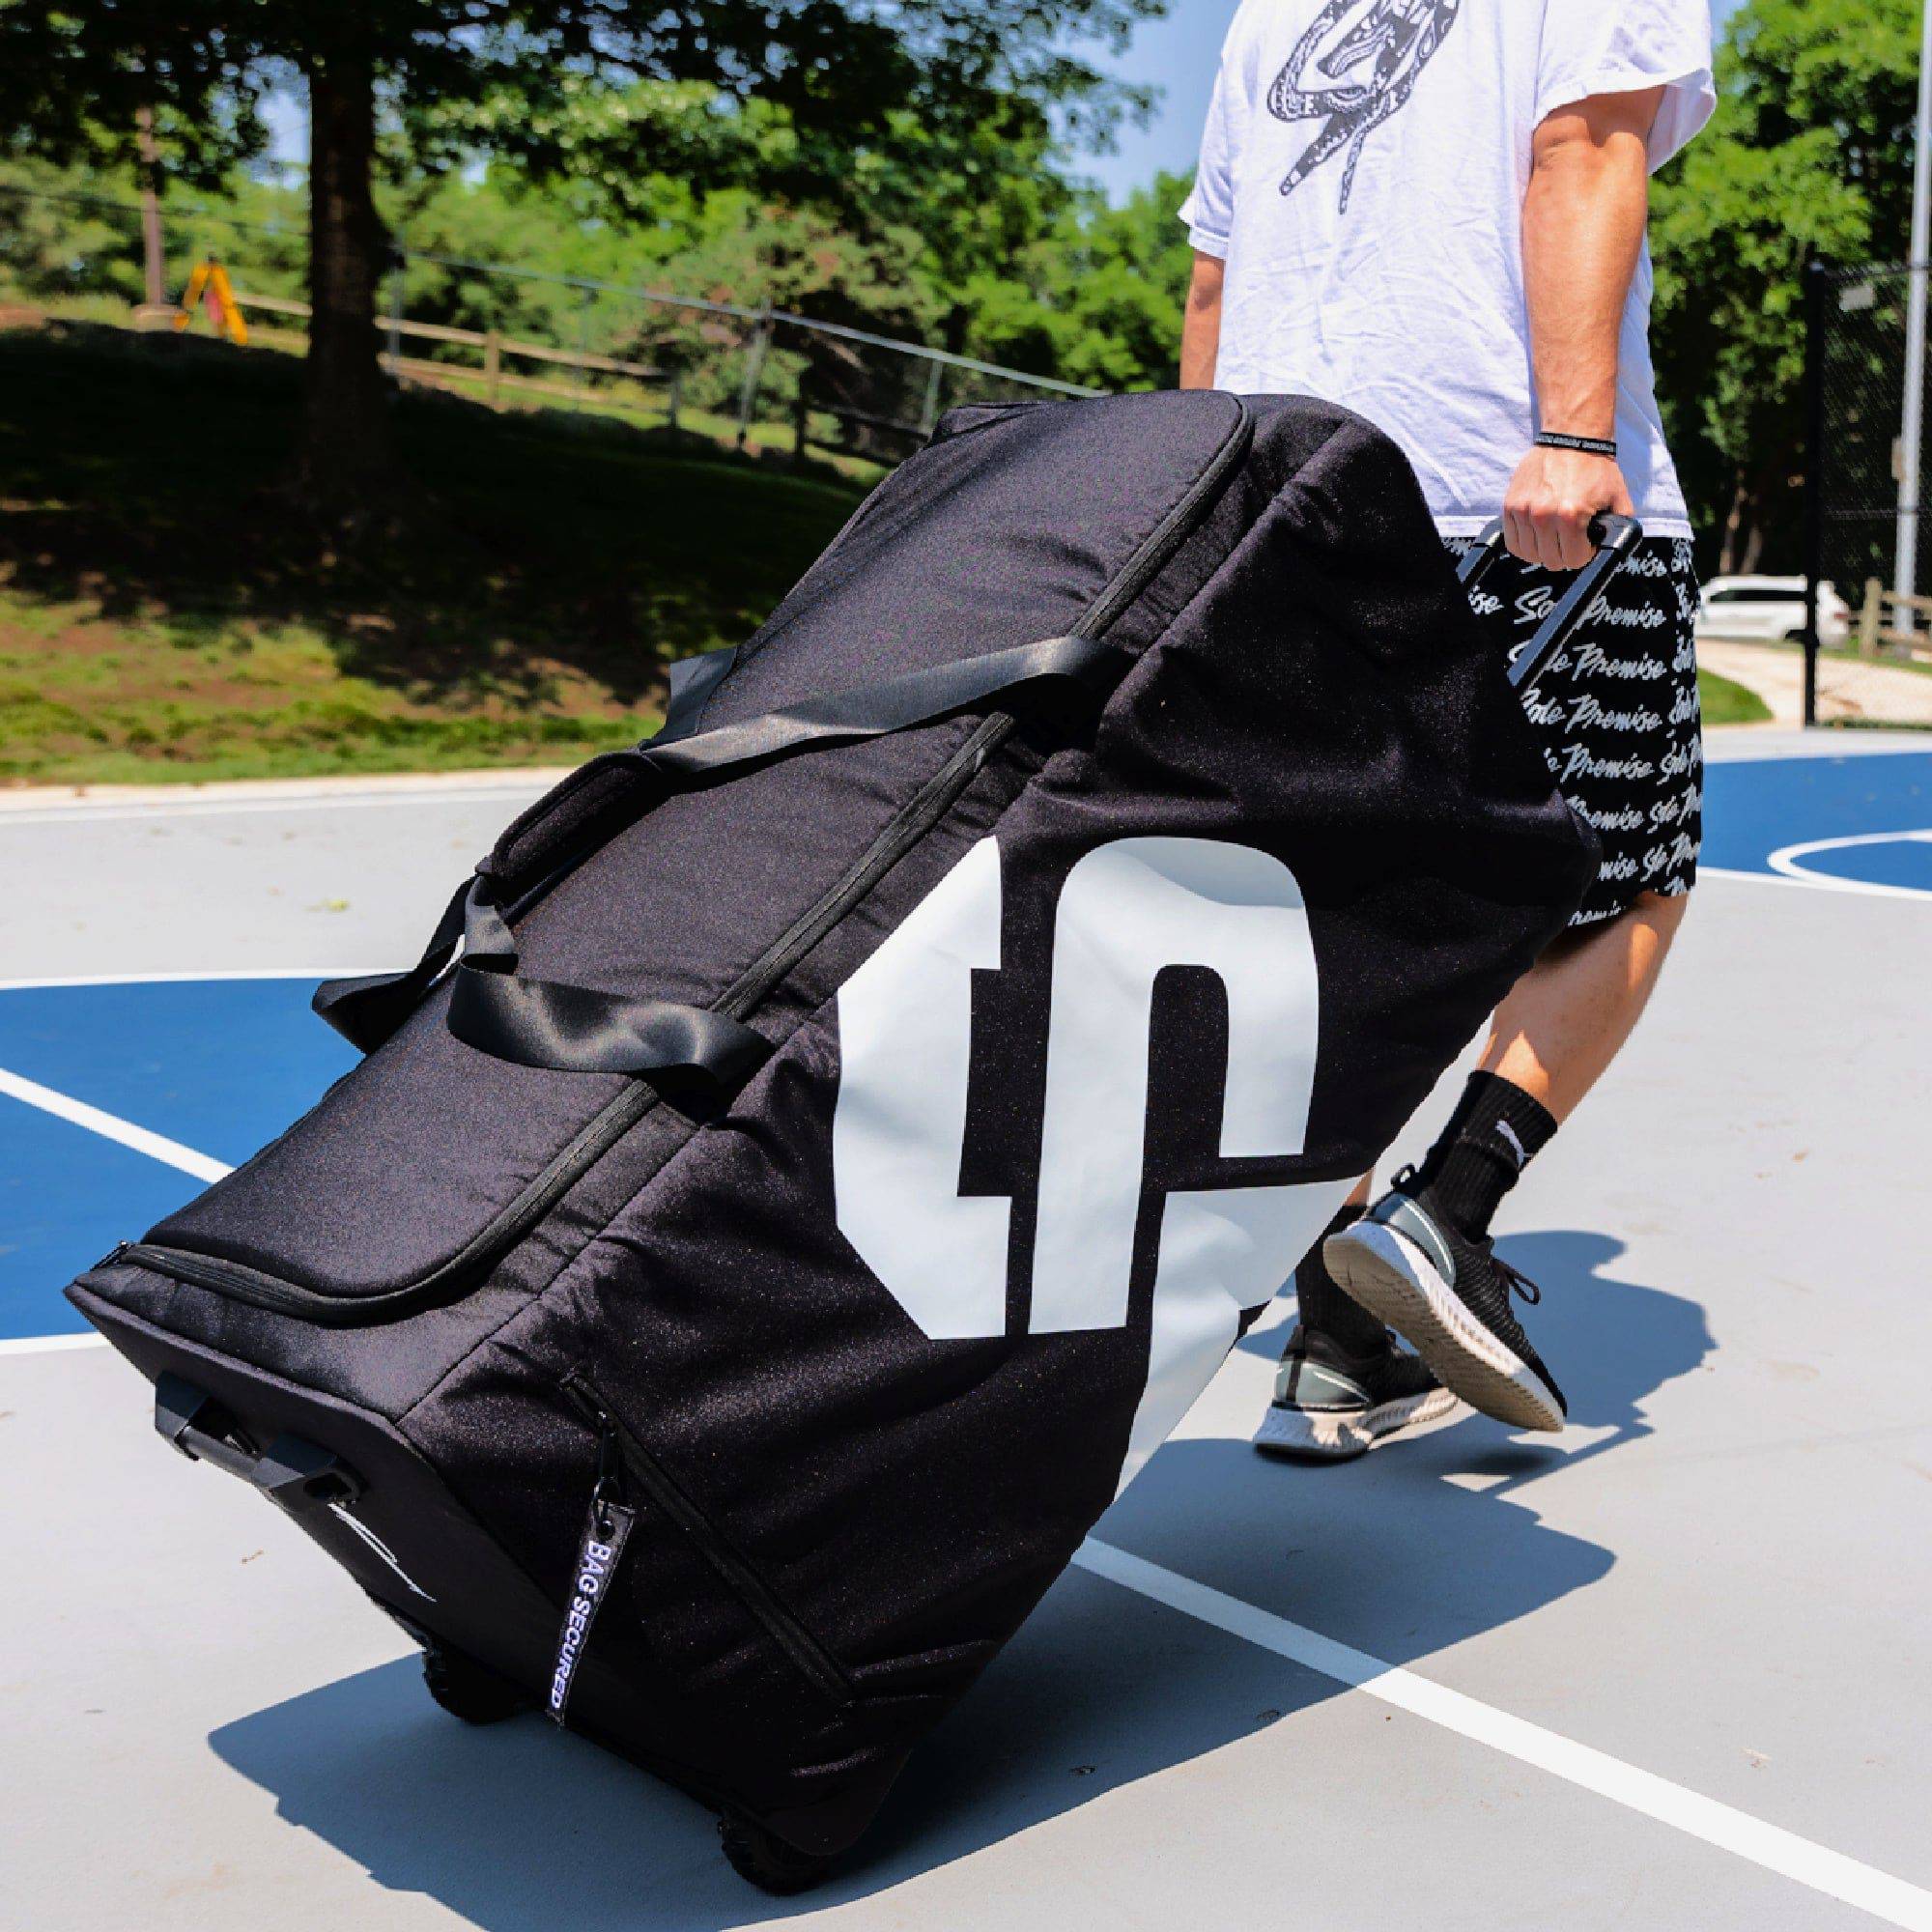 Ultimate Equipment Carrier With Wheels (Holds 18-20 Pairs of Shoes) - Sole Premise